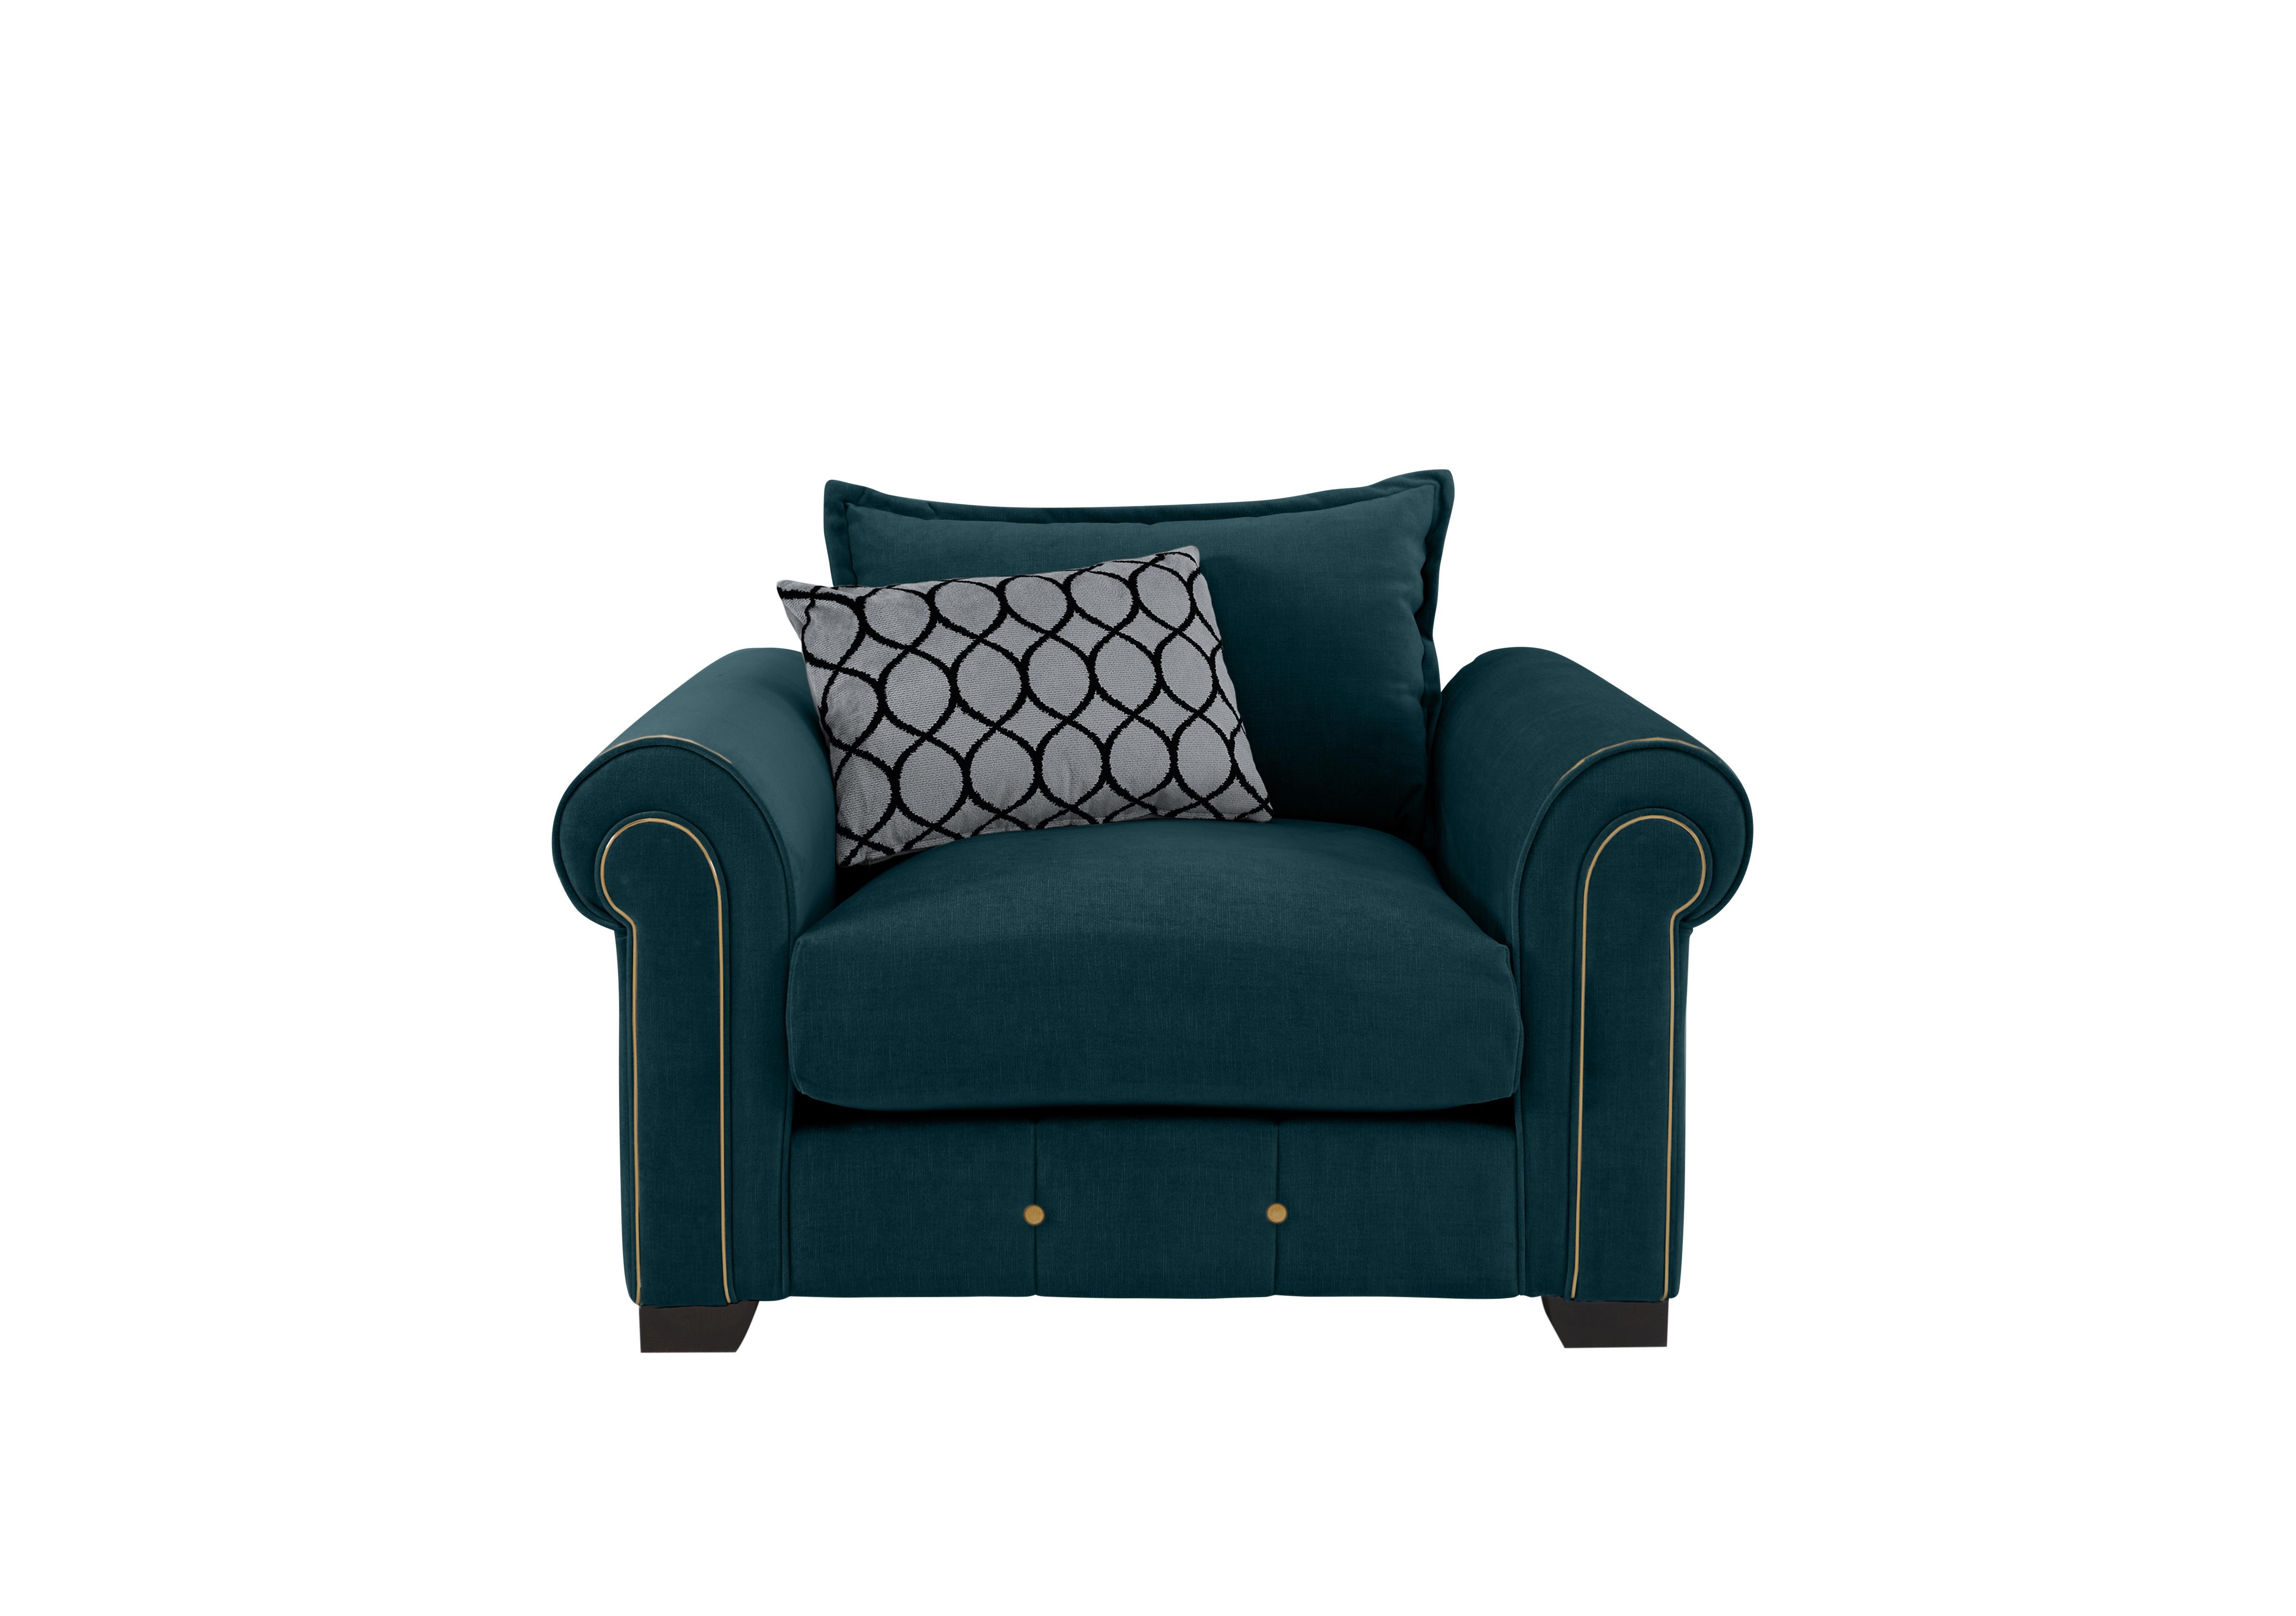 Sumptuous Fabric Armchair in Chamonix Teal Dk/Gold on Furniture Village